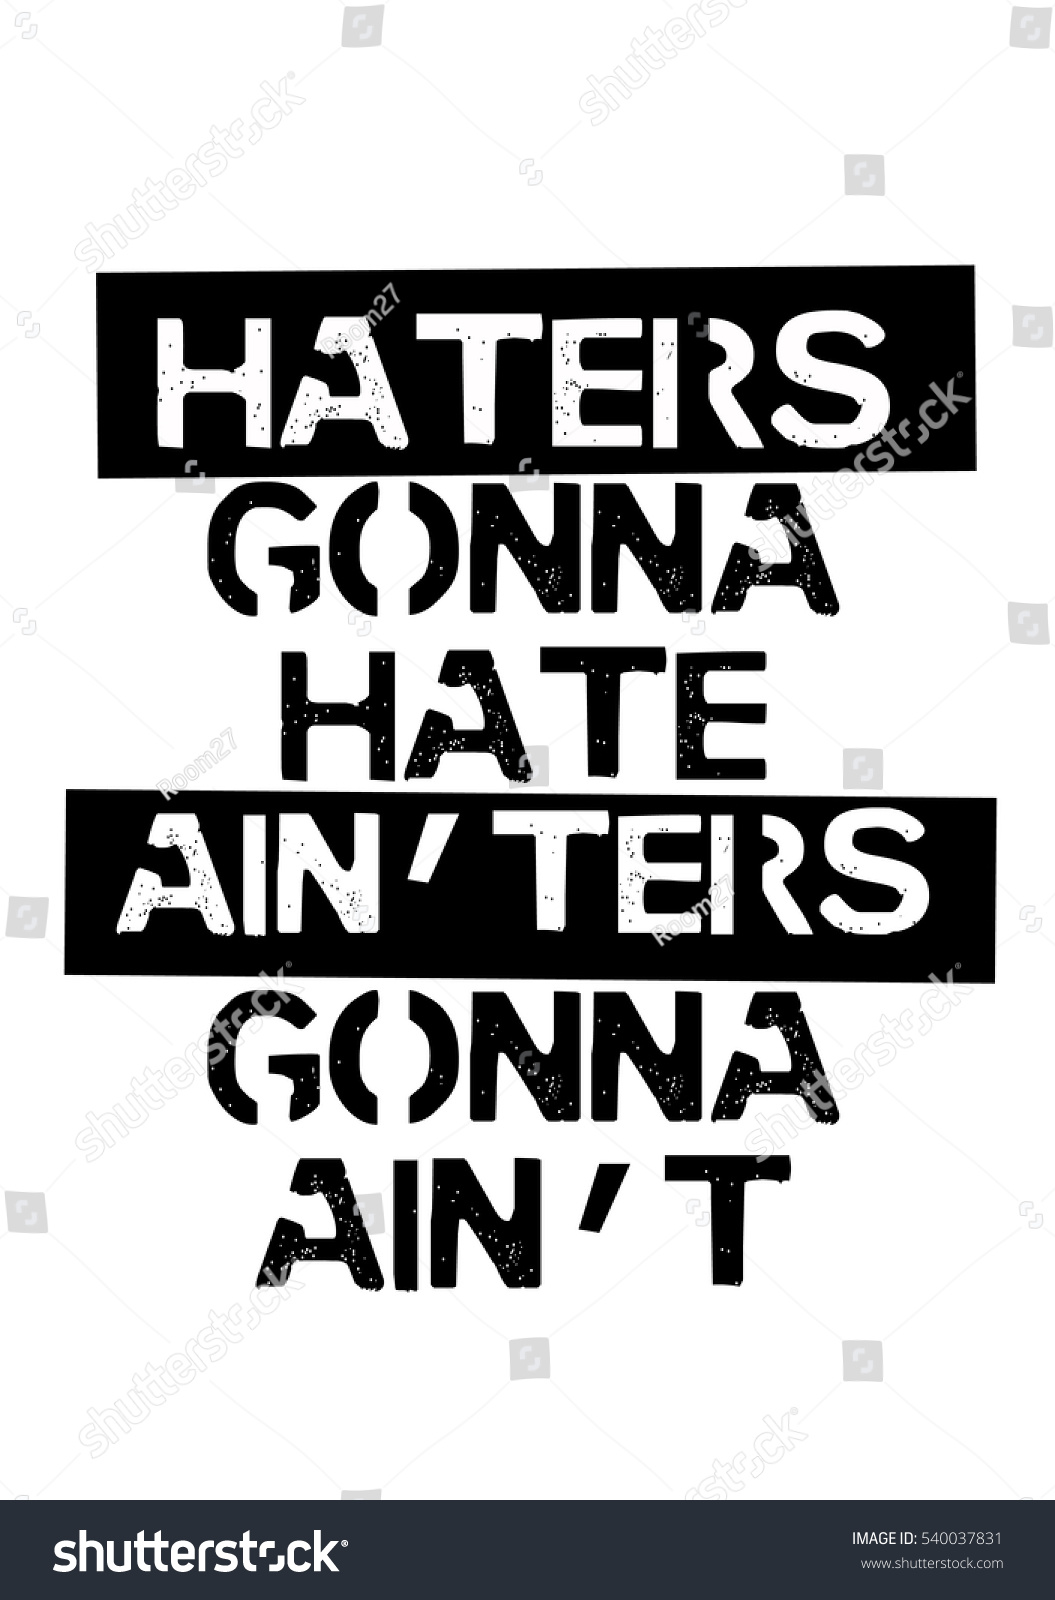 Haters gonna hate and ainters gonna aint